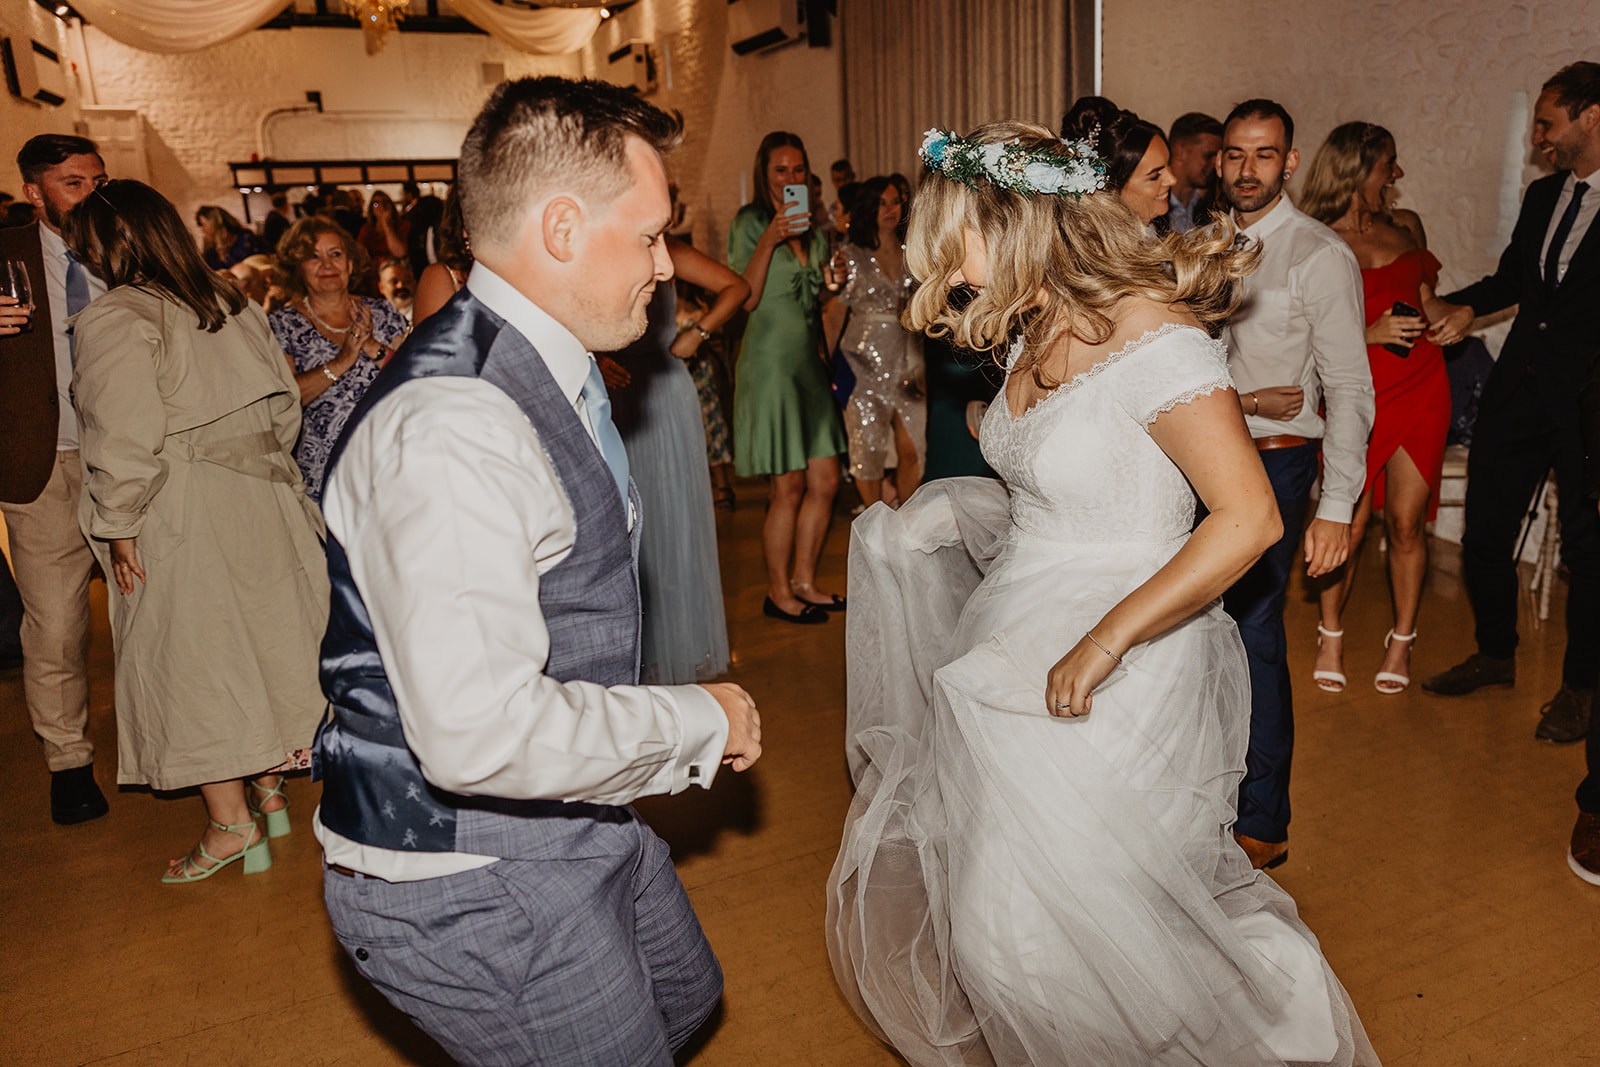 Bride and groom's first dance at Field Place Wedding Worthing, Sussex. By OliveJoy Photography.